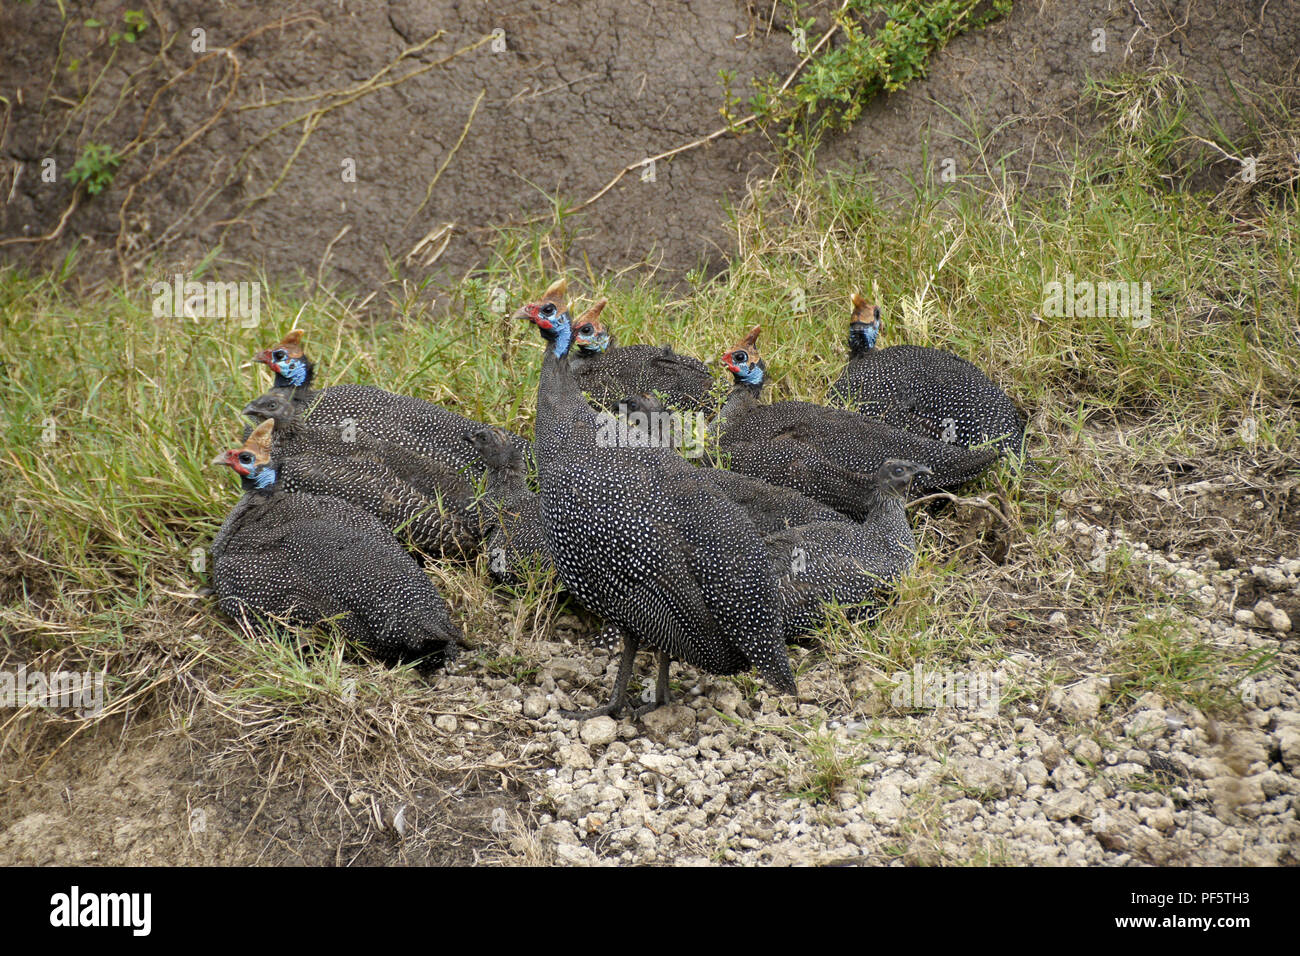 Helemeted guineafowl with chicks resting in small ravine, Masai Mara Game Reserve, Kenya Stock Photo